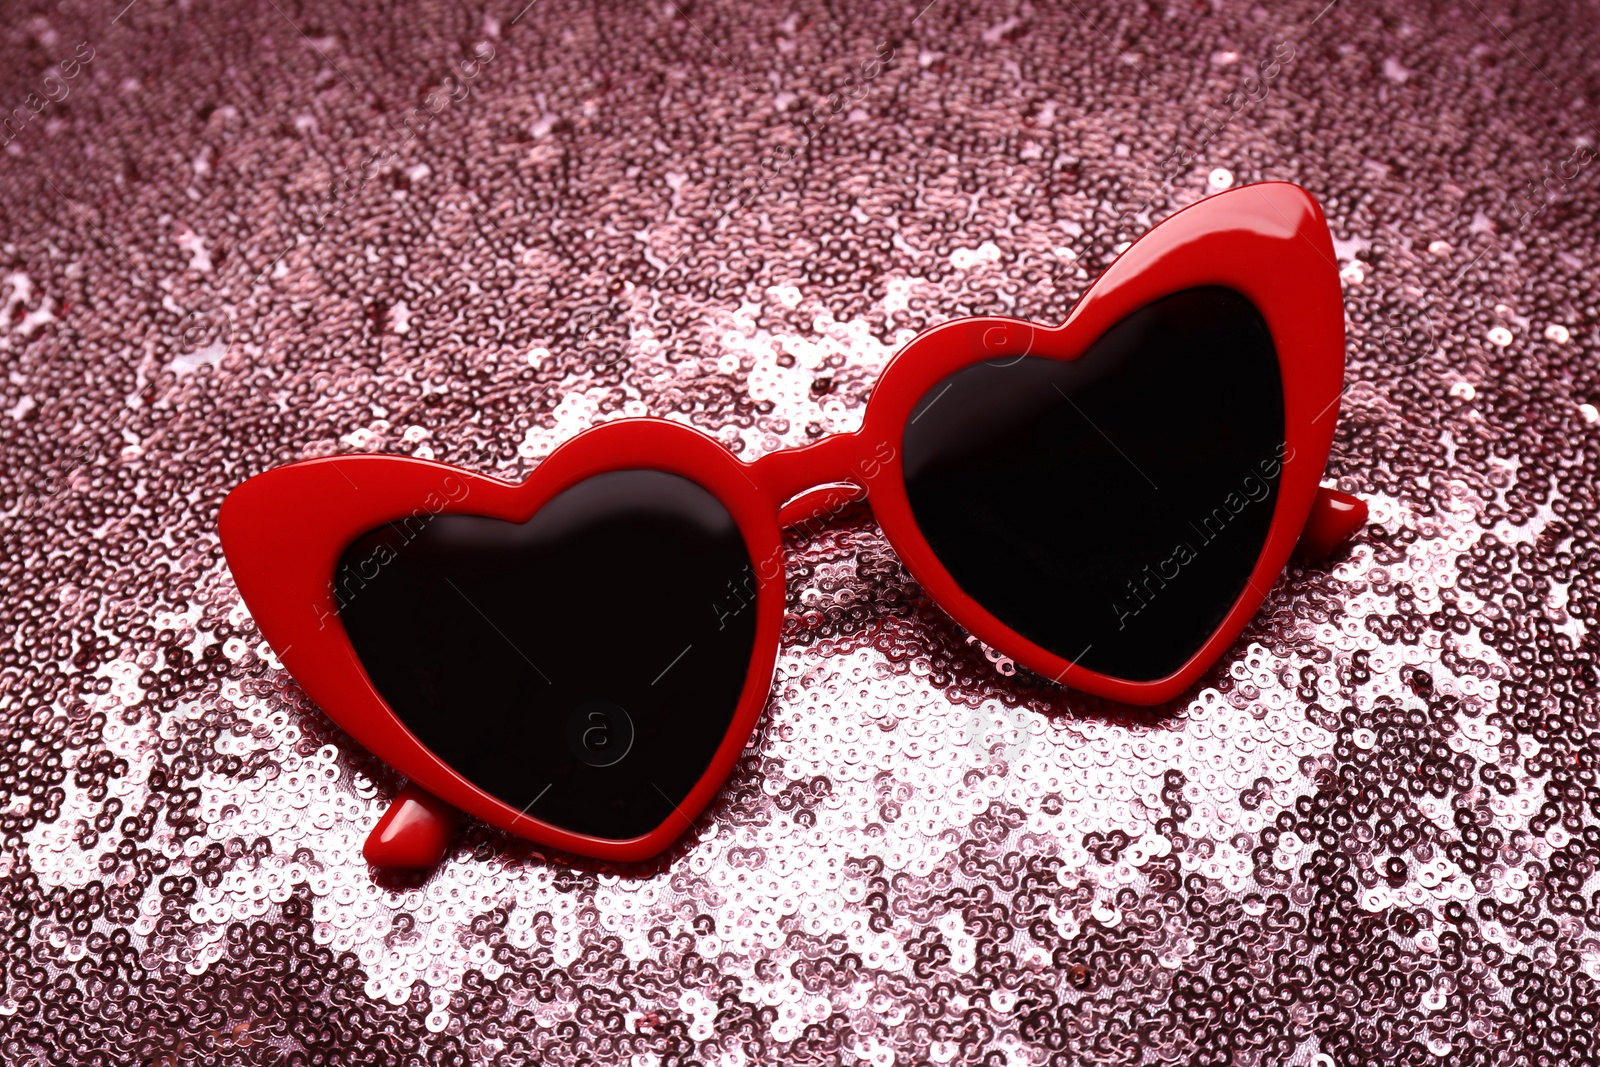 Photo of Red heart shaped sunglasses on bright background